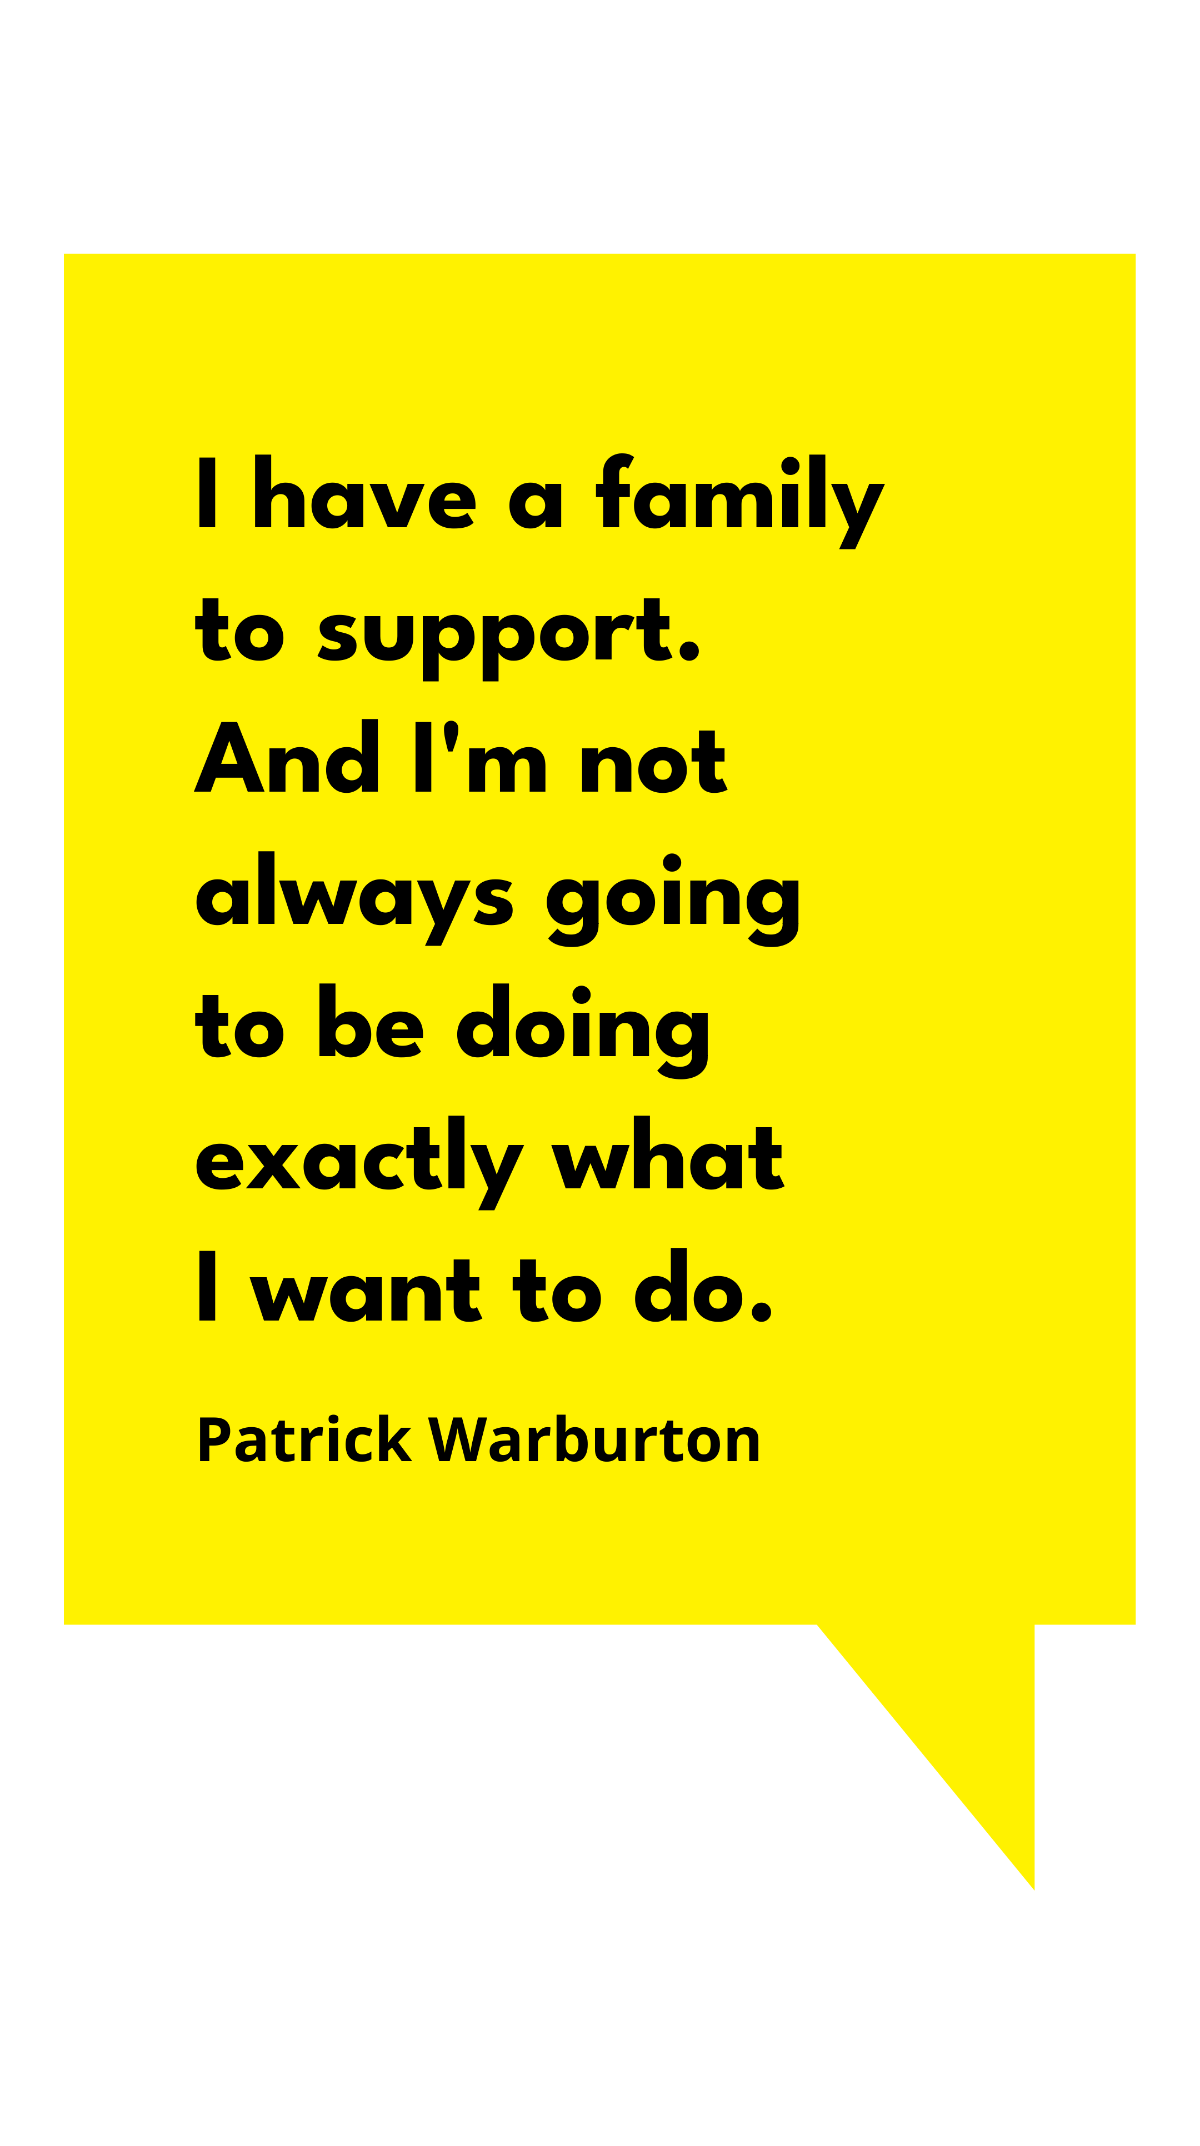 Patrick Warburton - I have a family to support. And I'm not always going to be doing exactly what I want to do. Template